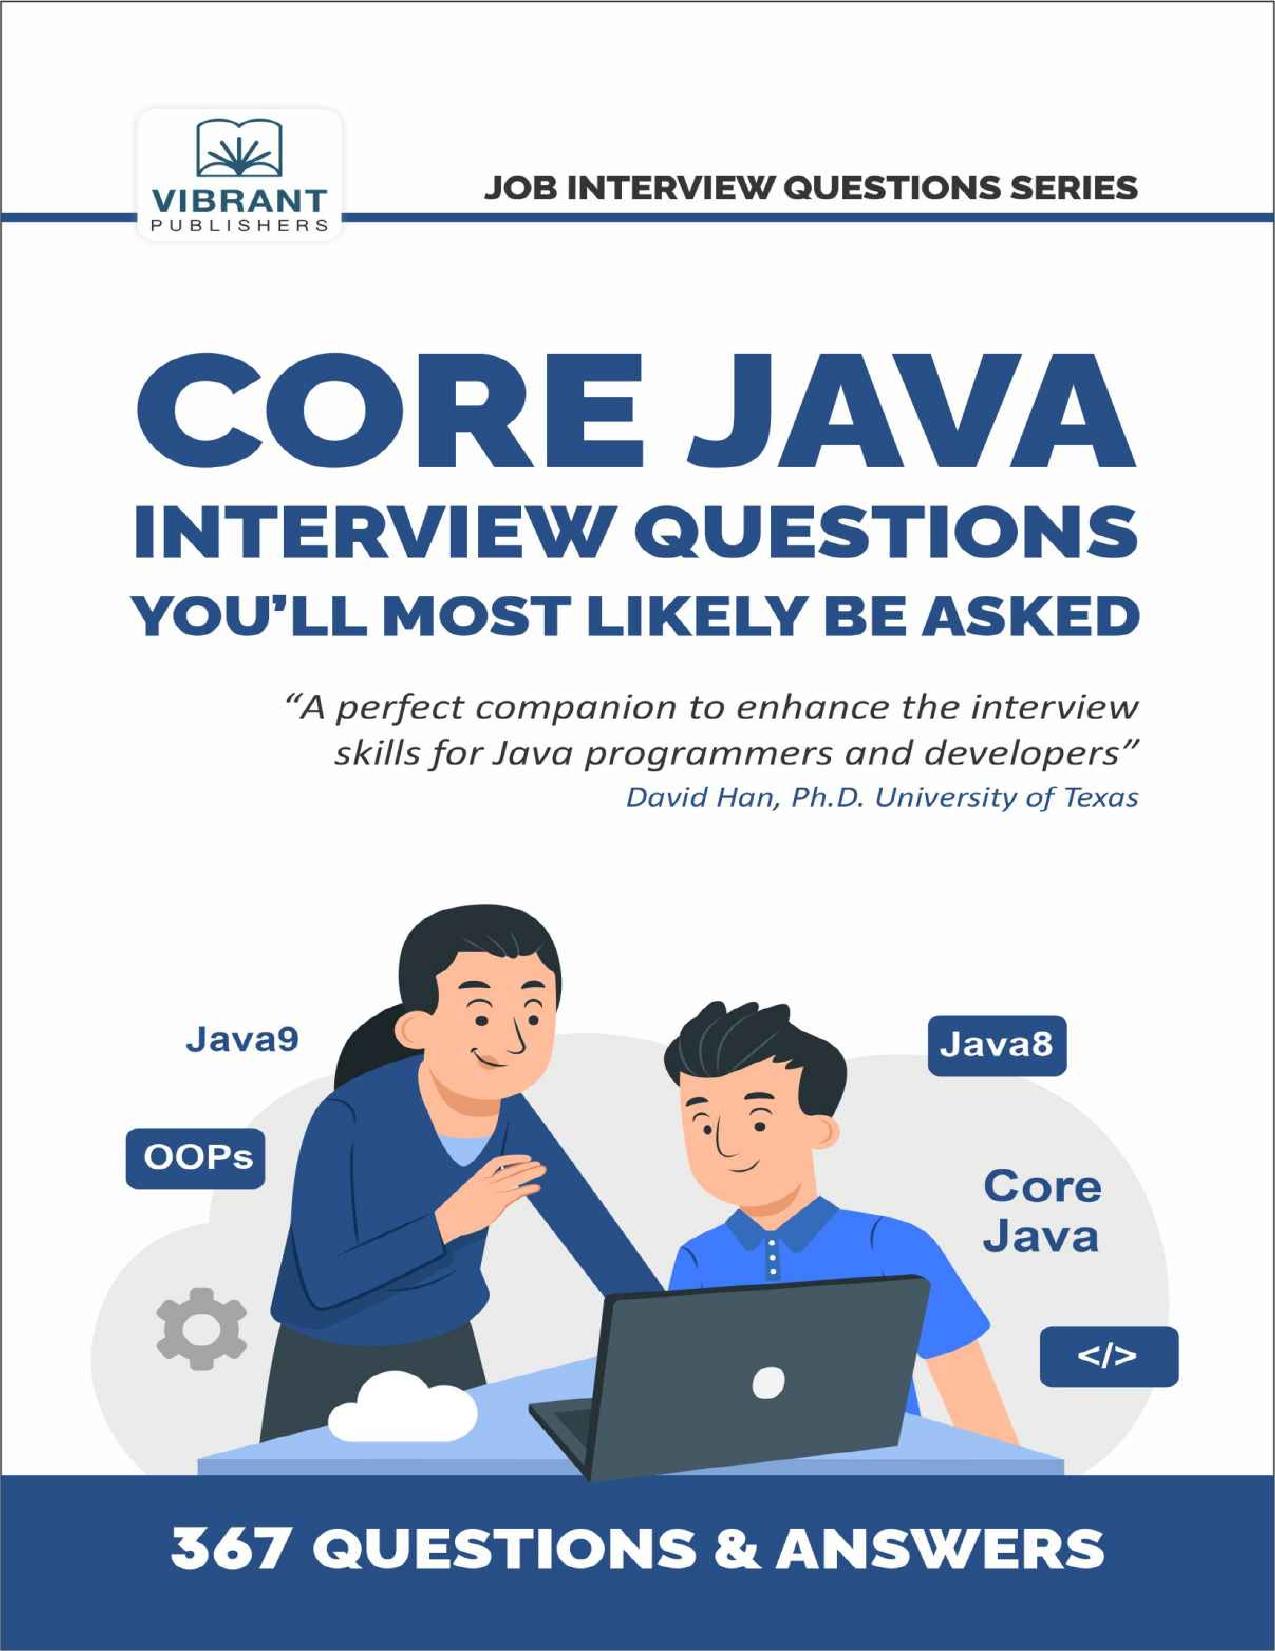 Core Java Interview Questions You'll Most Likely Be Asked (Job Interview Questions Series) by Vibrant Publishers